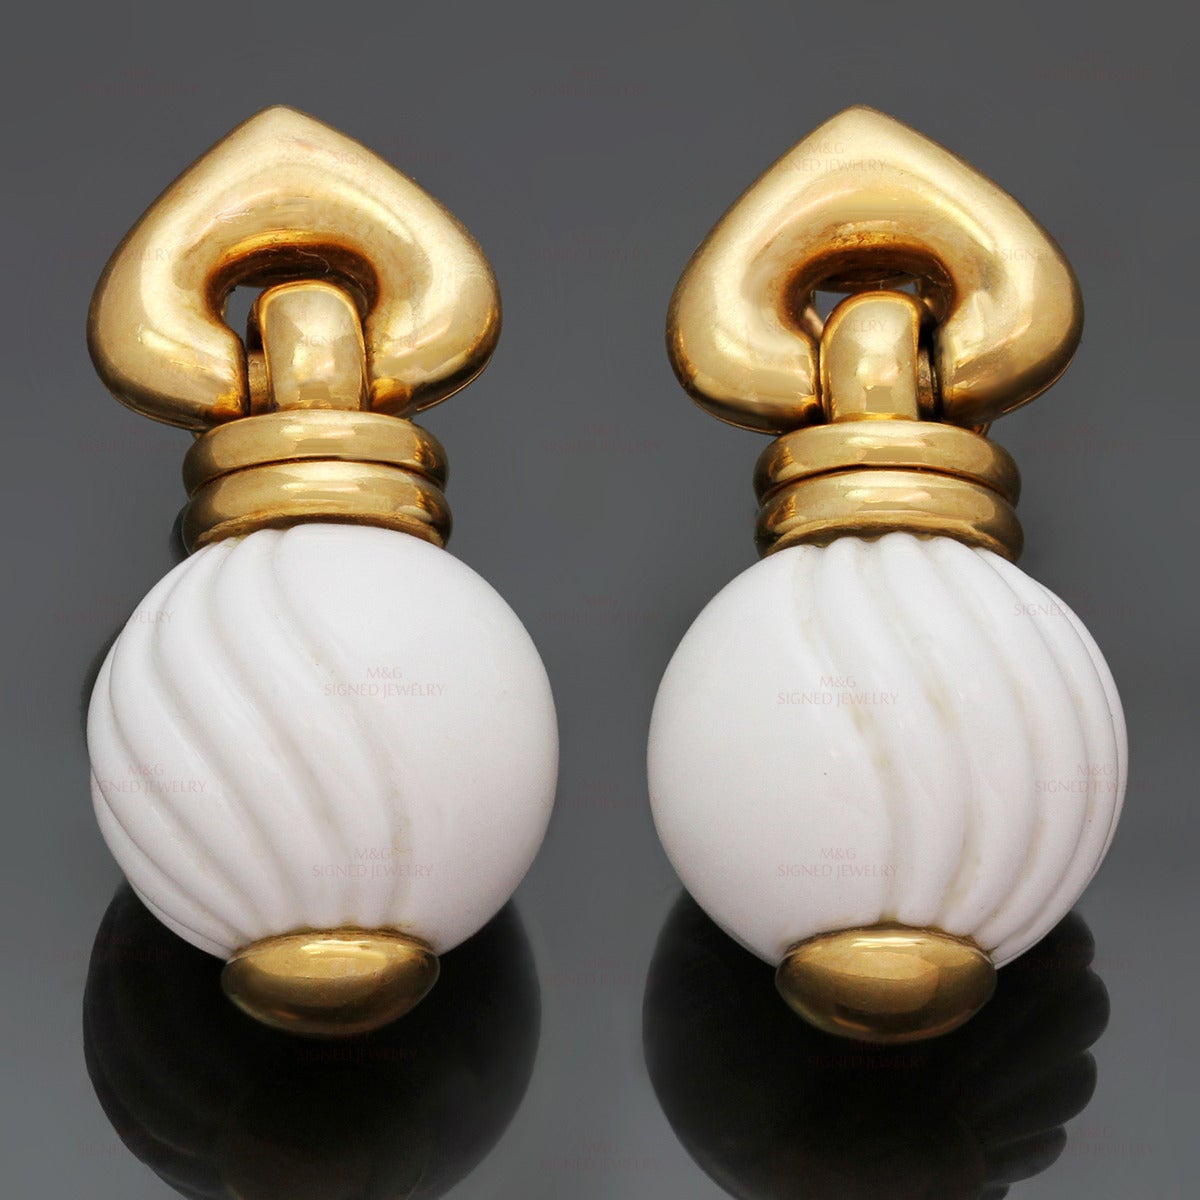 These elegant Bvlgari earrings from the Chandra collection are crafted in 18k yellow gold and feature beautifully textured white ceramic drops. Made in Italy circa 1990s. Measurements: 0.62" (16mm) width, 1.37" (35mm) length.